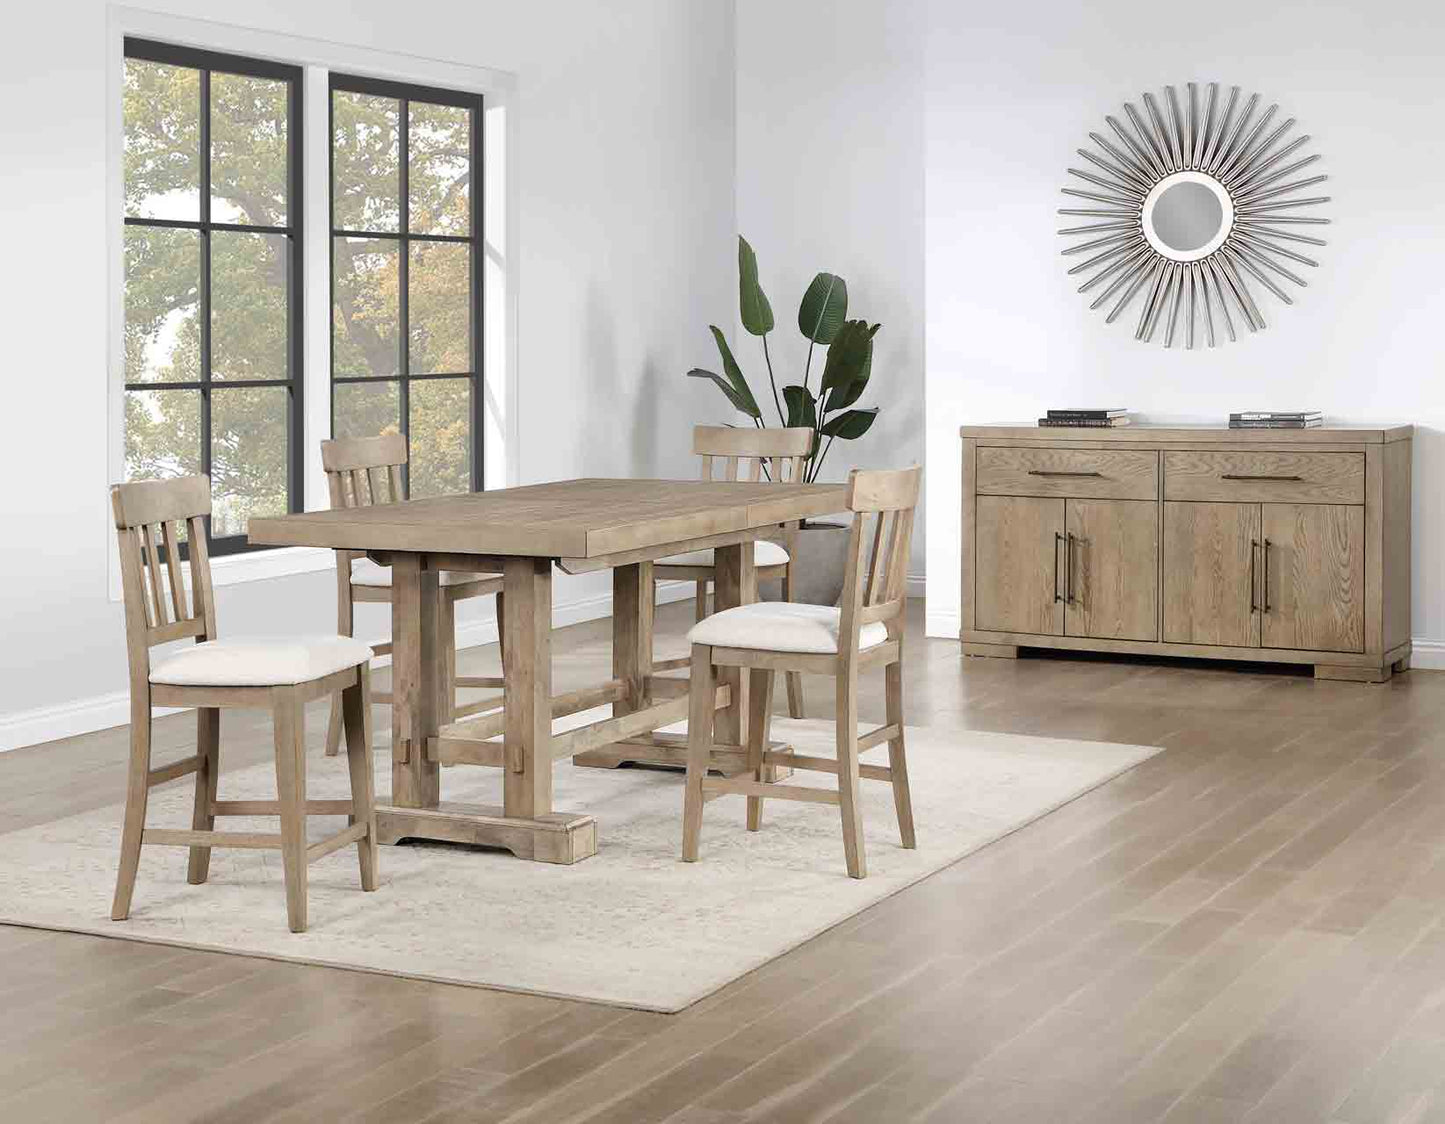 Napa 5-Piece Counter Dining Set, Sand
(Table & 4 Counter Chairs)